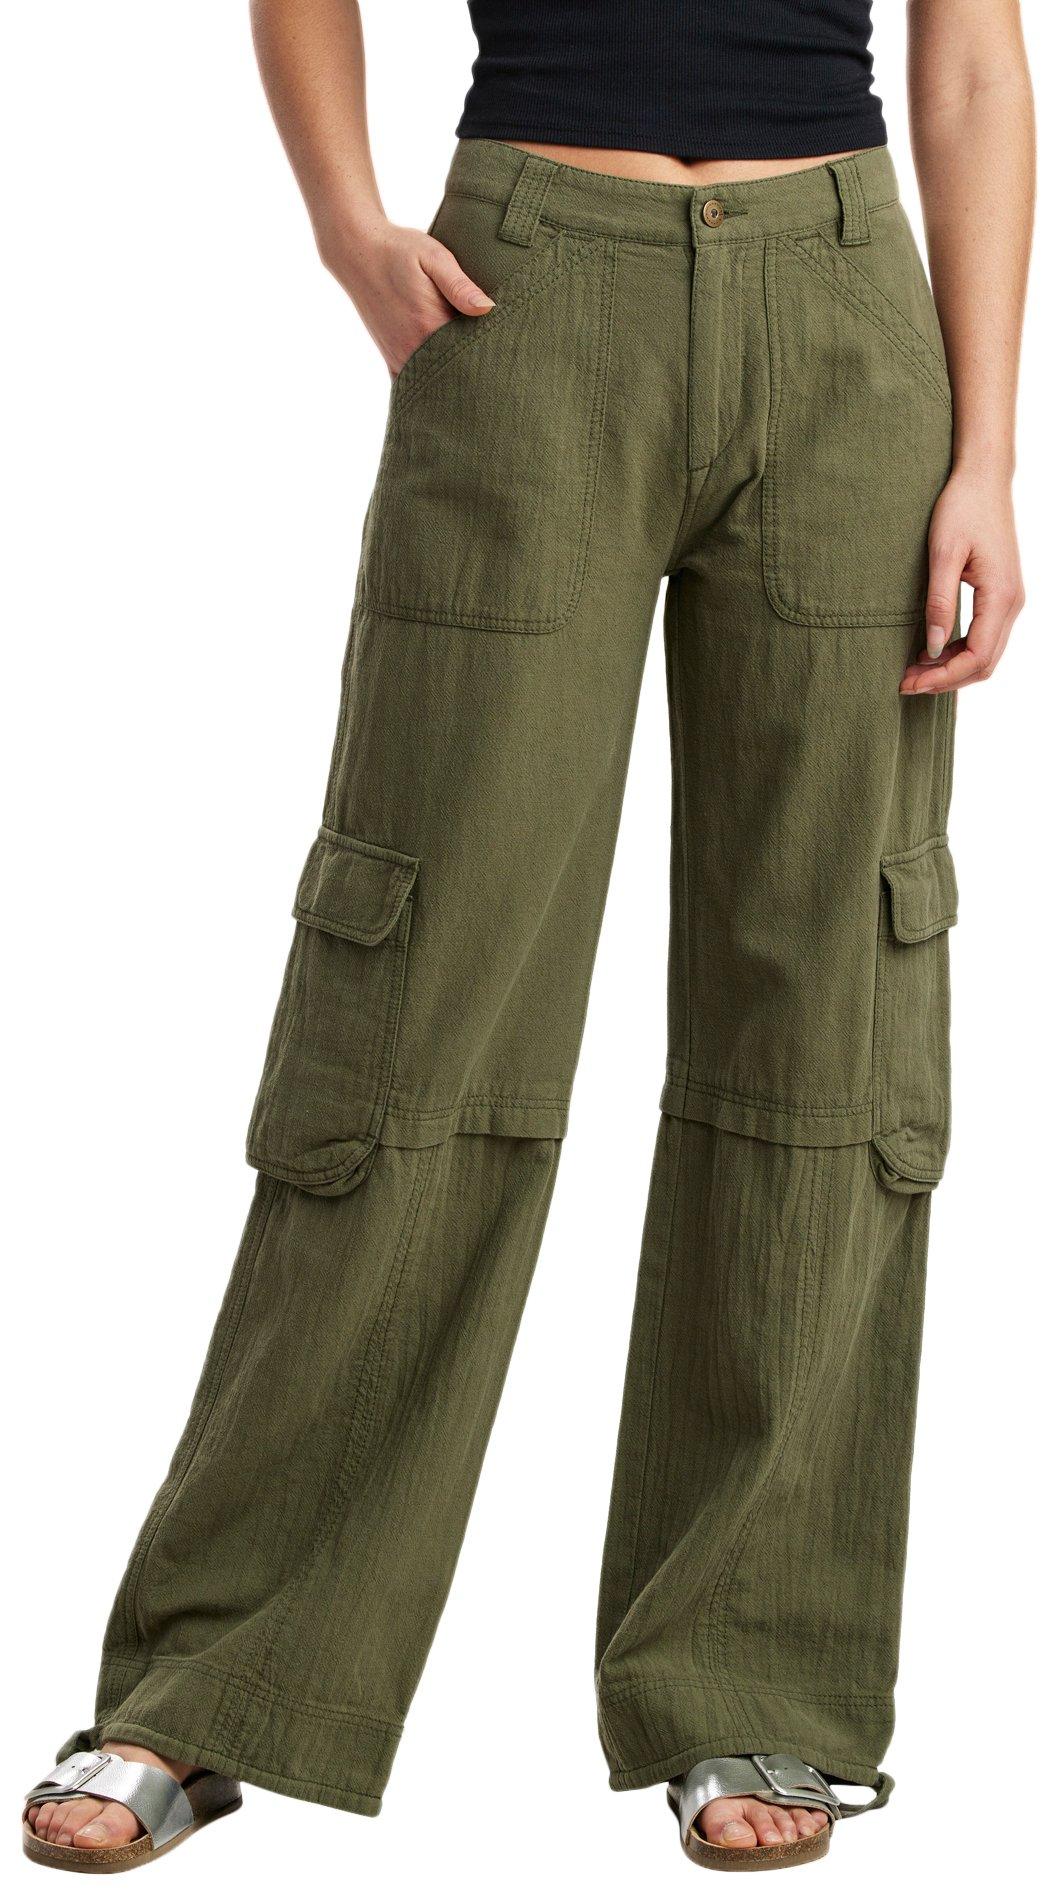 Supplies by Unionbay Women's Solid Wide Leg Cargo Pants